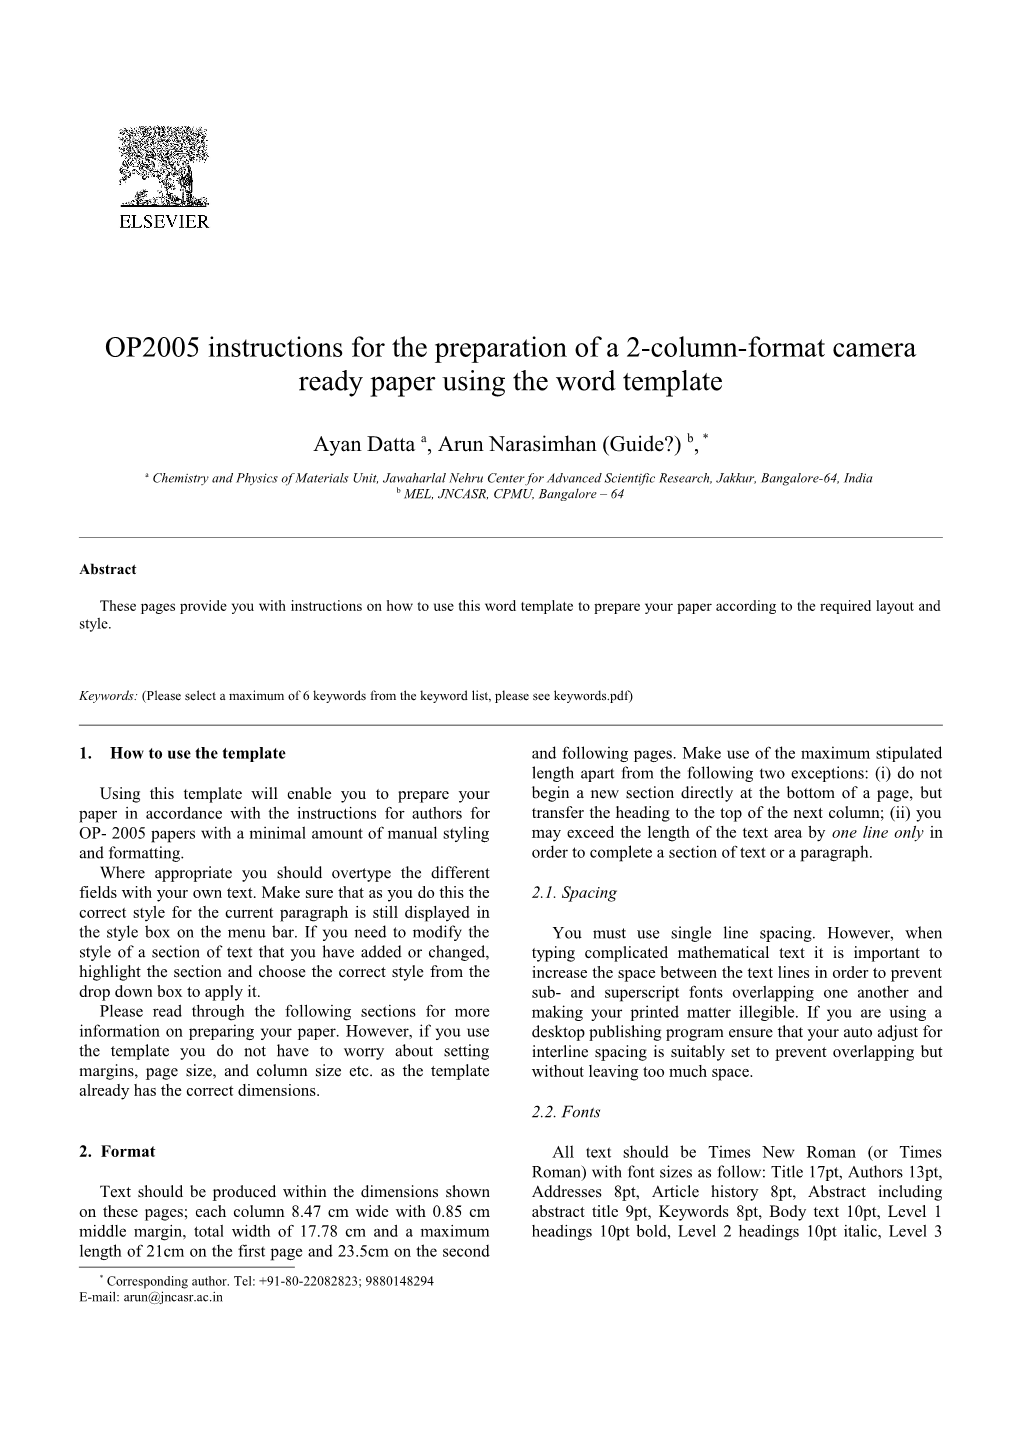 Elsevier Instructions for the Preparation of a 2-Column-Format Camera Ready Paper